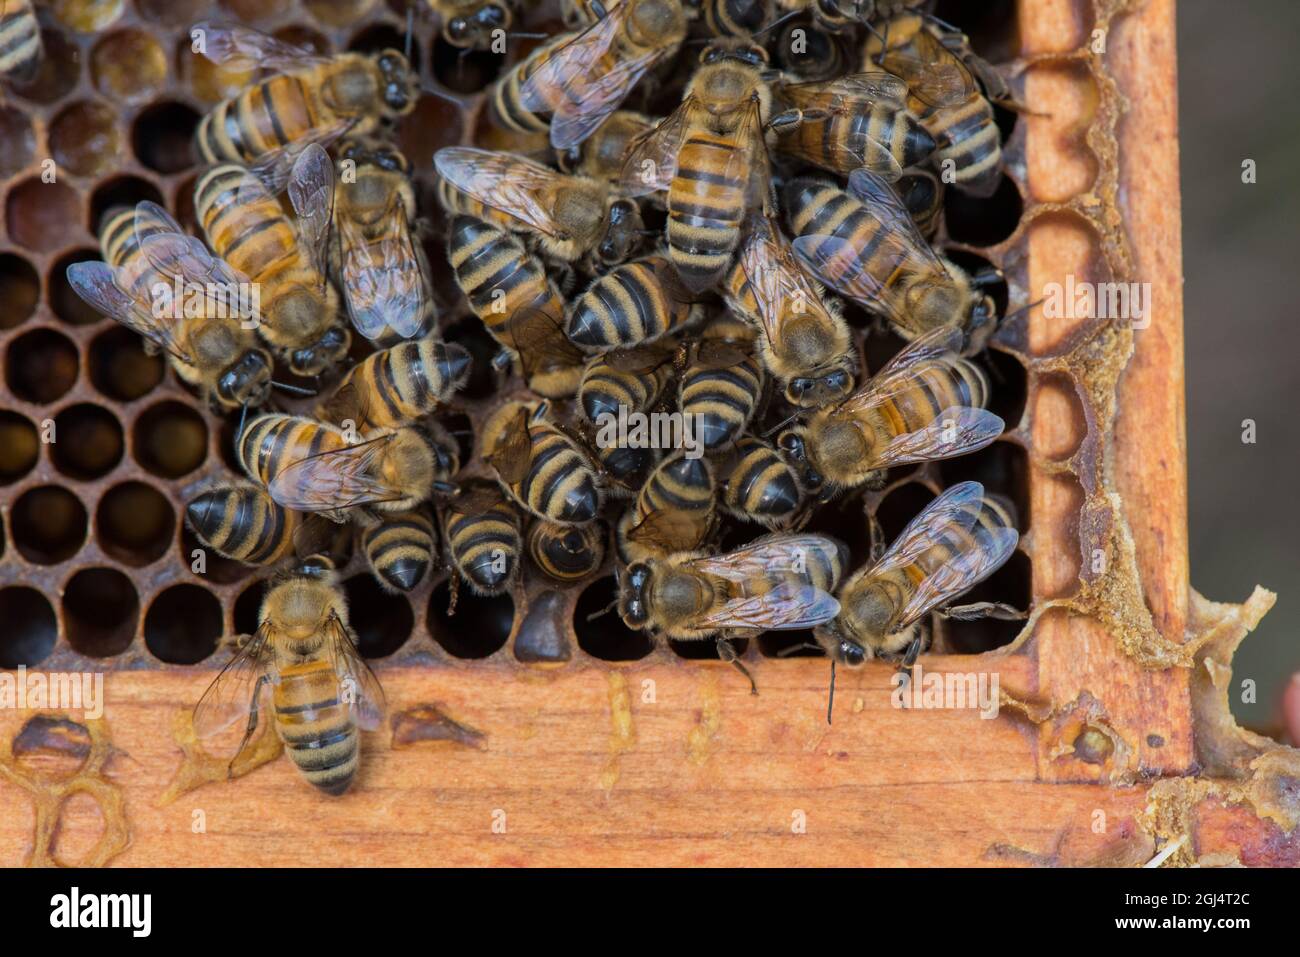 A cluster of bees on a Langstroth hive depositing nectar and pollen into was cells on a wooden frame. Stock Photo